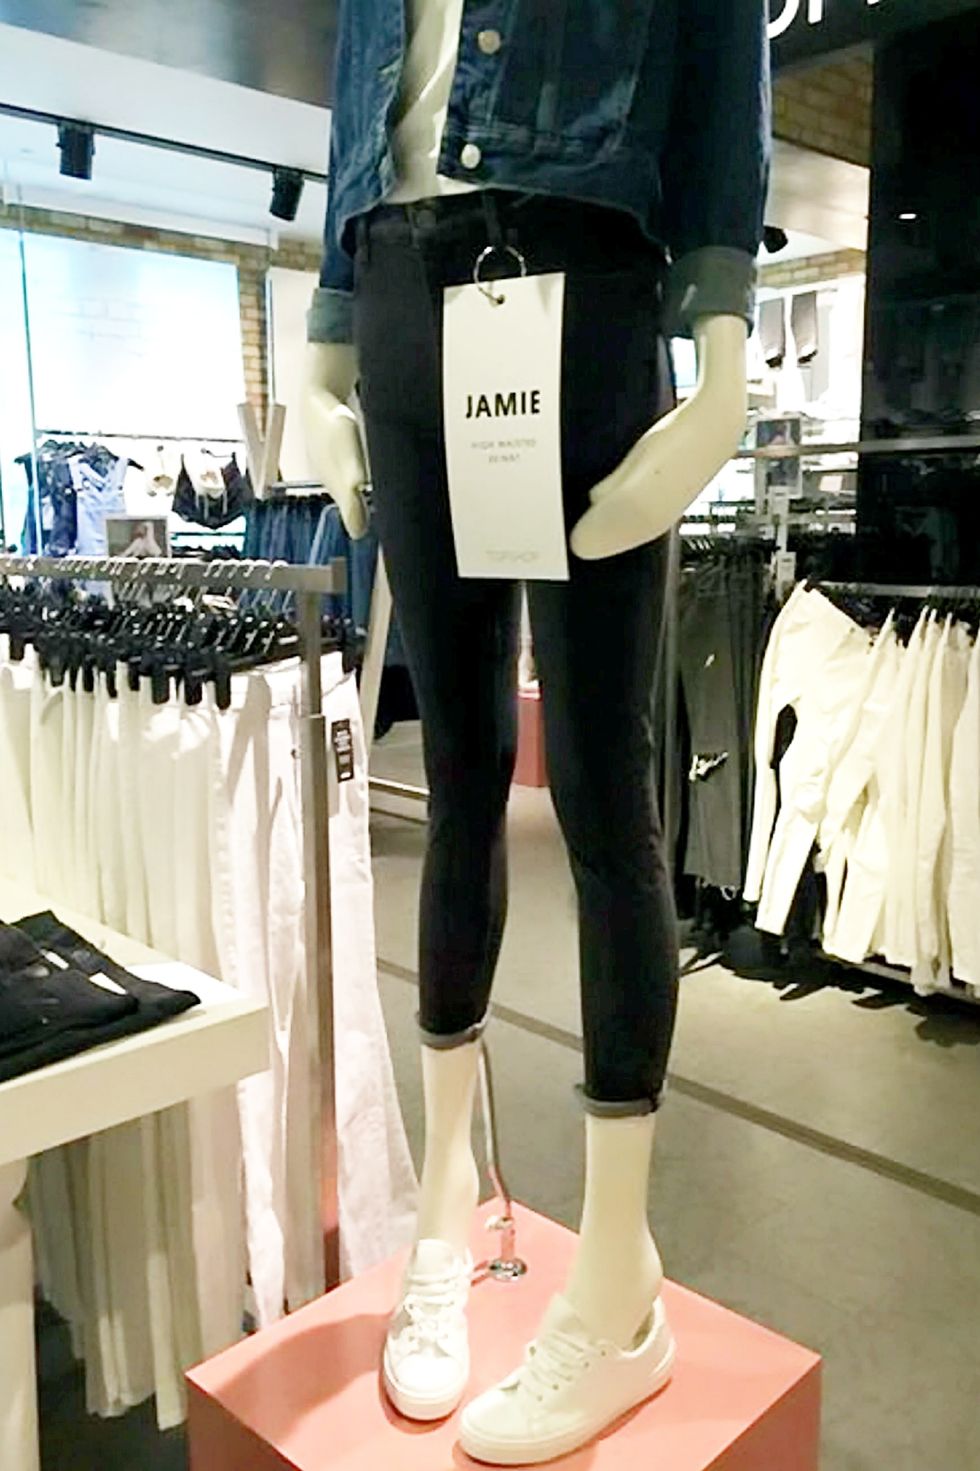 Topshop mannequin is removed after customer complaints